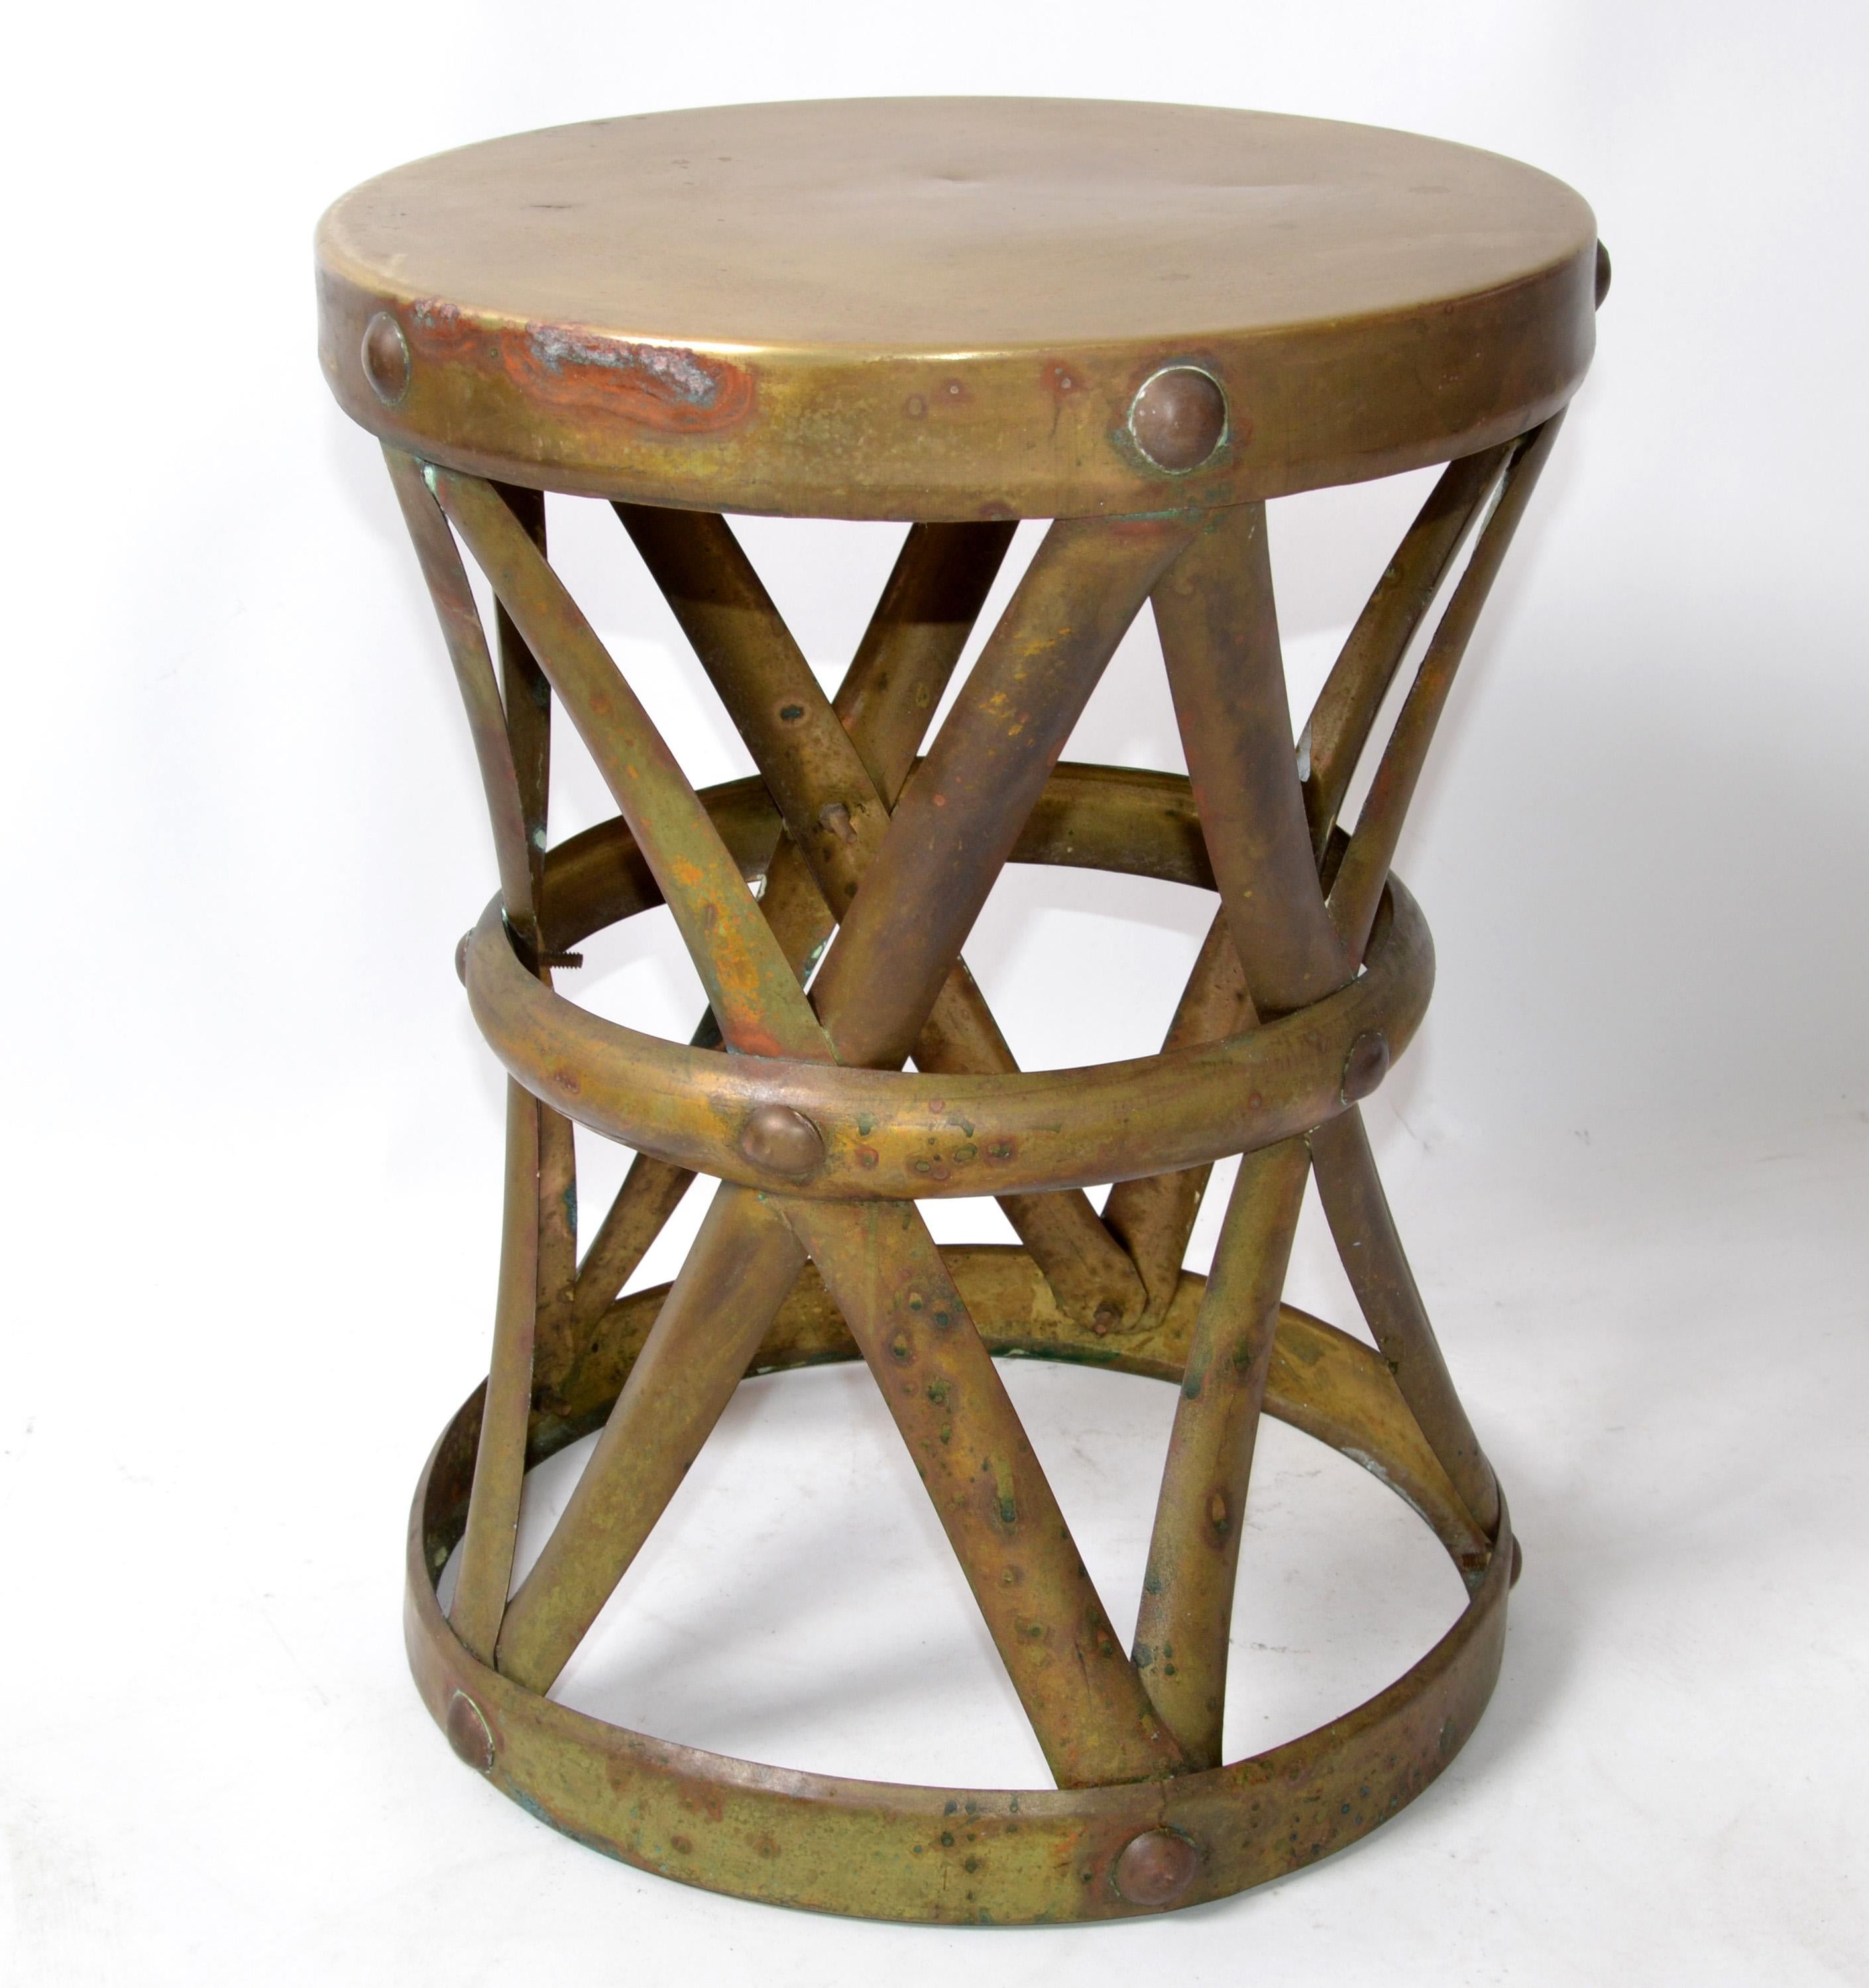 Sarreid Ltd. Spain handcrafted Mid-Century Modern occasional brass drum table or stool.
Left in the warm aged Patina condition to show it's age and History.
Can Be polished for an additional charge and will take circa 3 weeks lead-time.